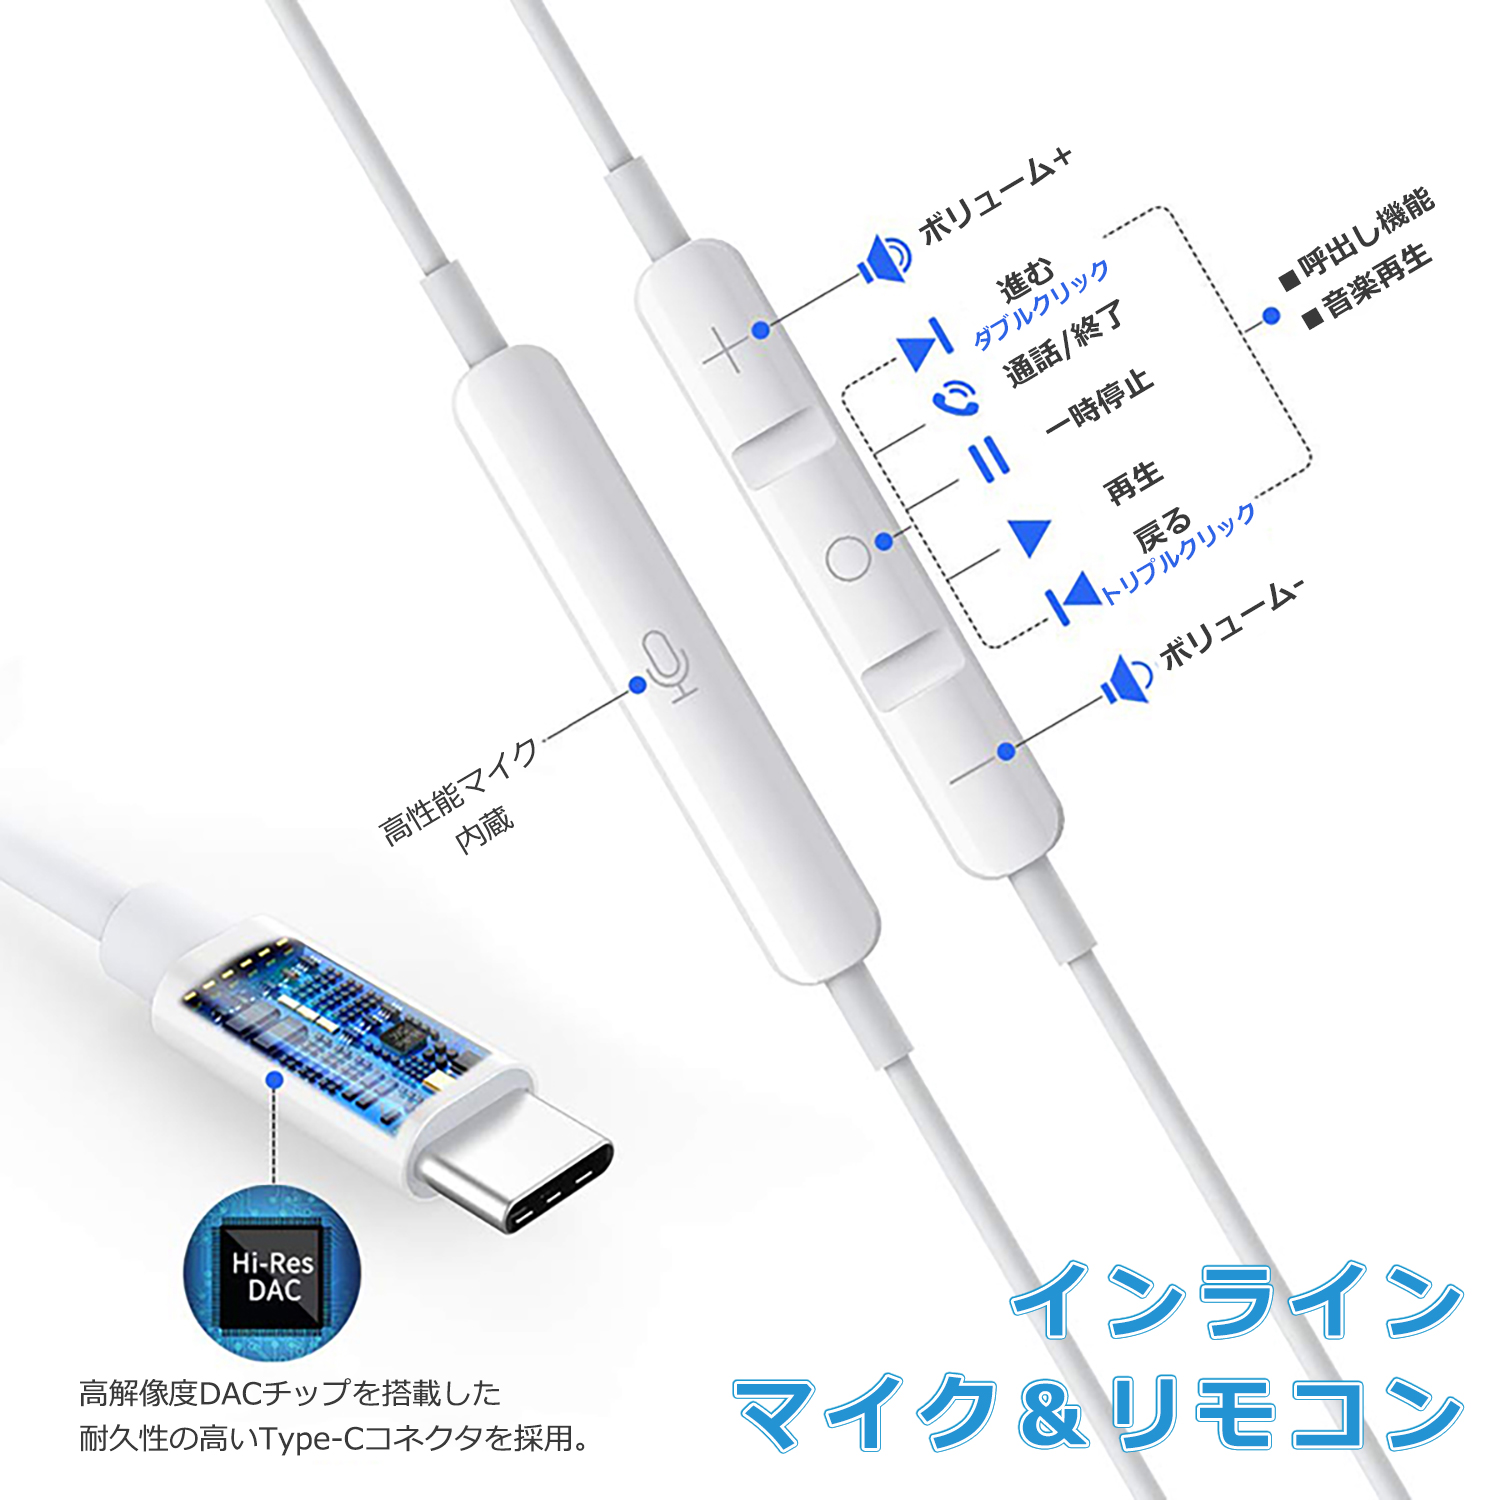  today maximum 600 jpy discount iPhone15 Plus Pro Max correspondence USB-C TYPE-C earphone magnetism sport wire control volume adjustment with function me570k free shipping 